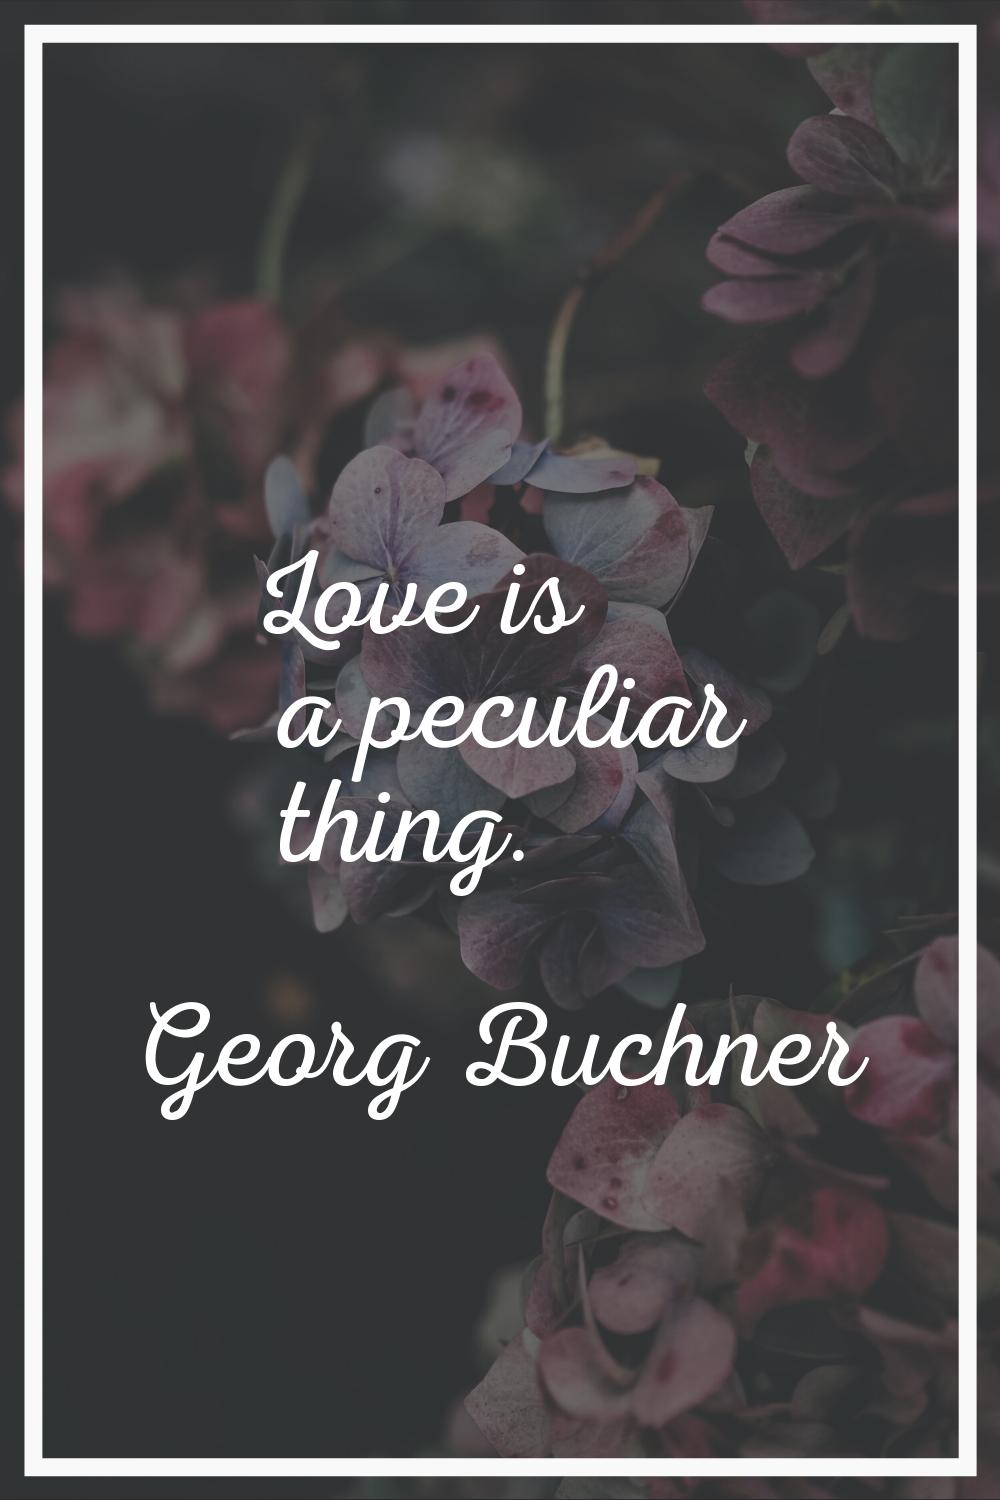 Love is a peculiar thing.